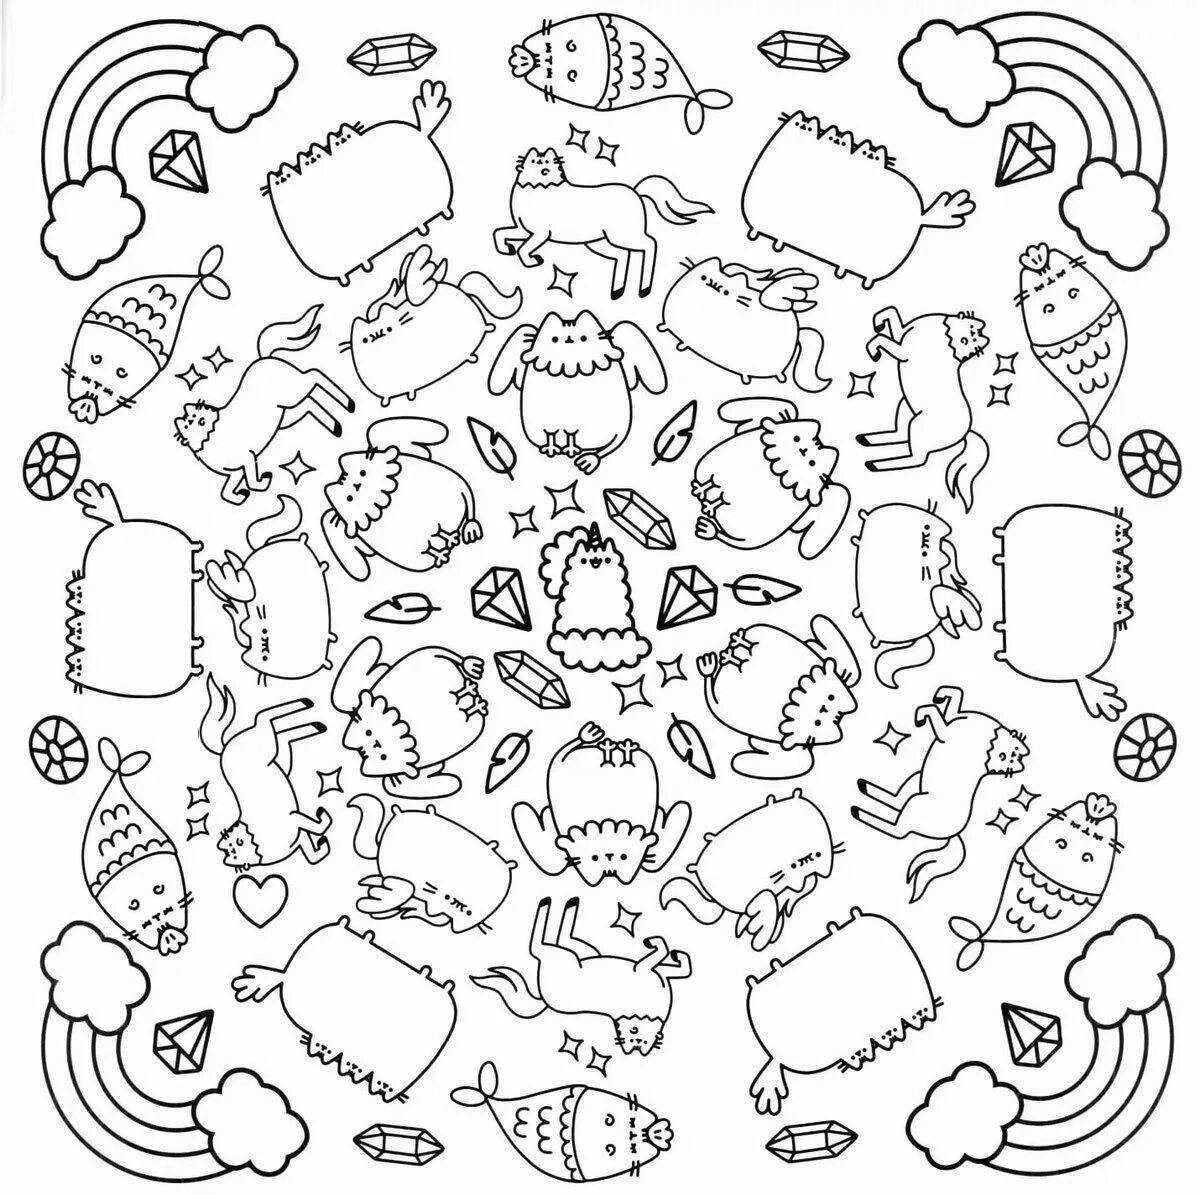 Radiant coloring page cute little ones for stickers